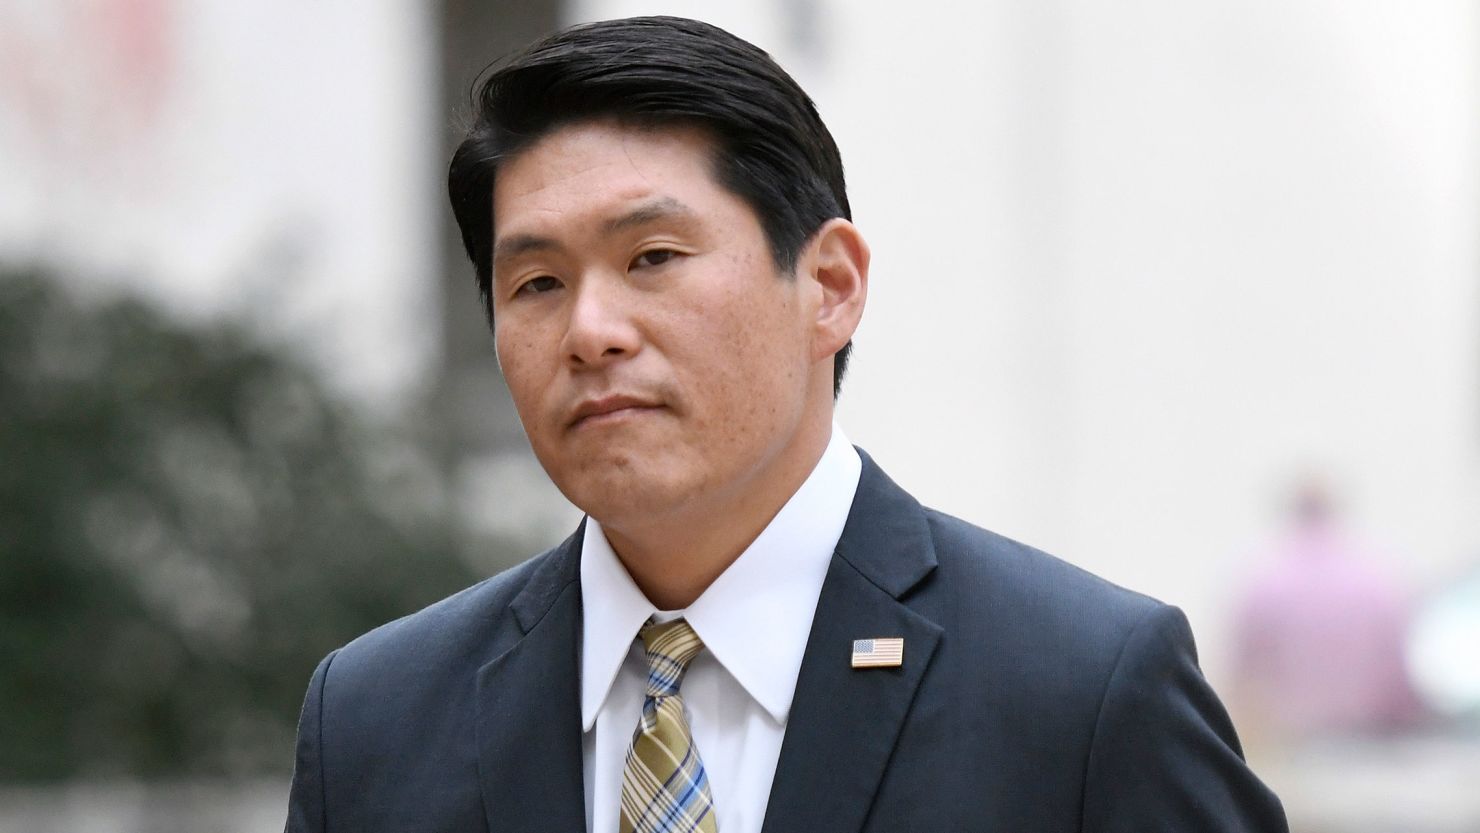 Robert Hur Grilled on Capitol Hill Over Biden Classified Documents Probe